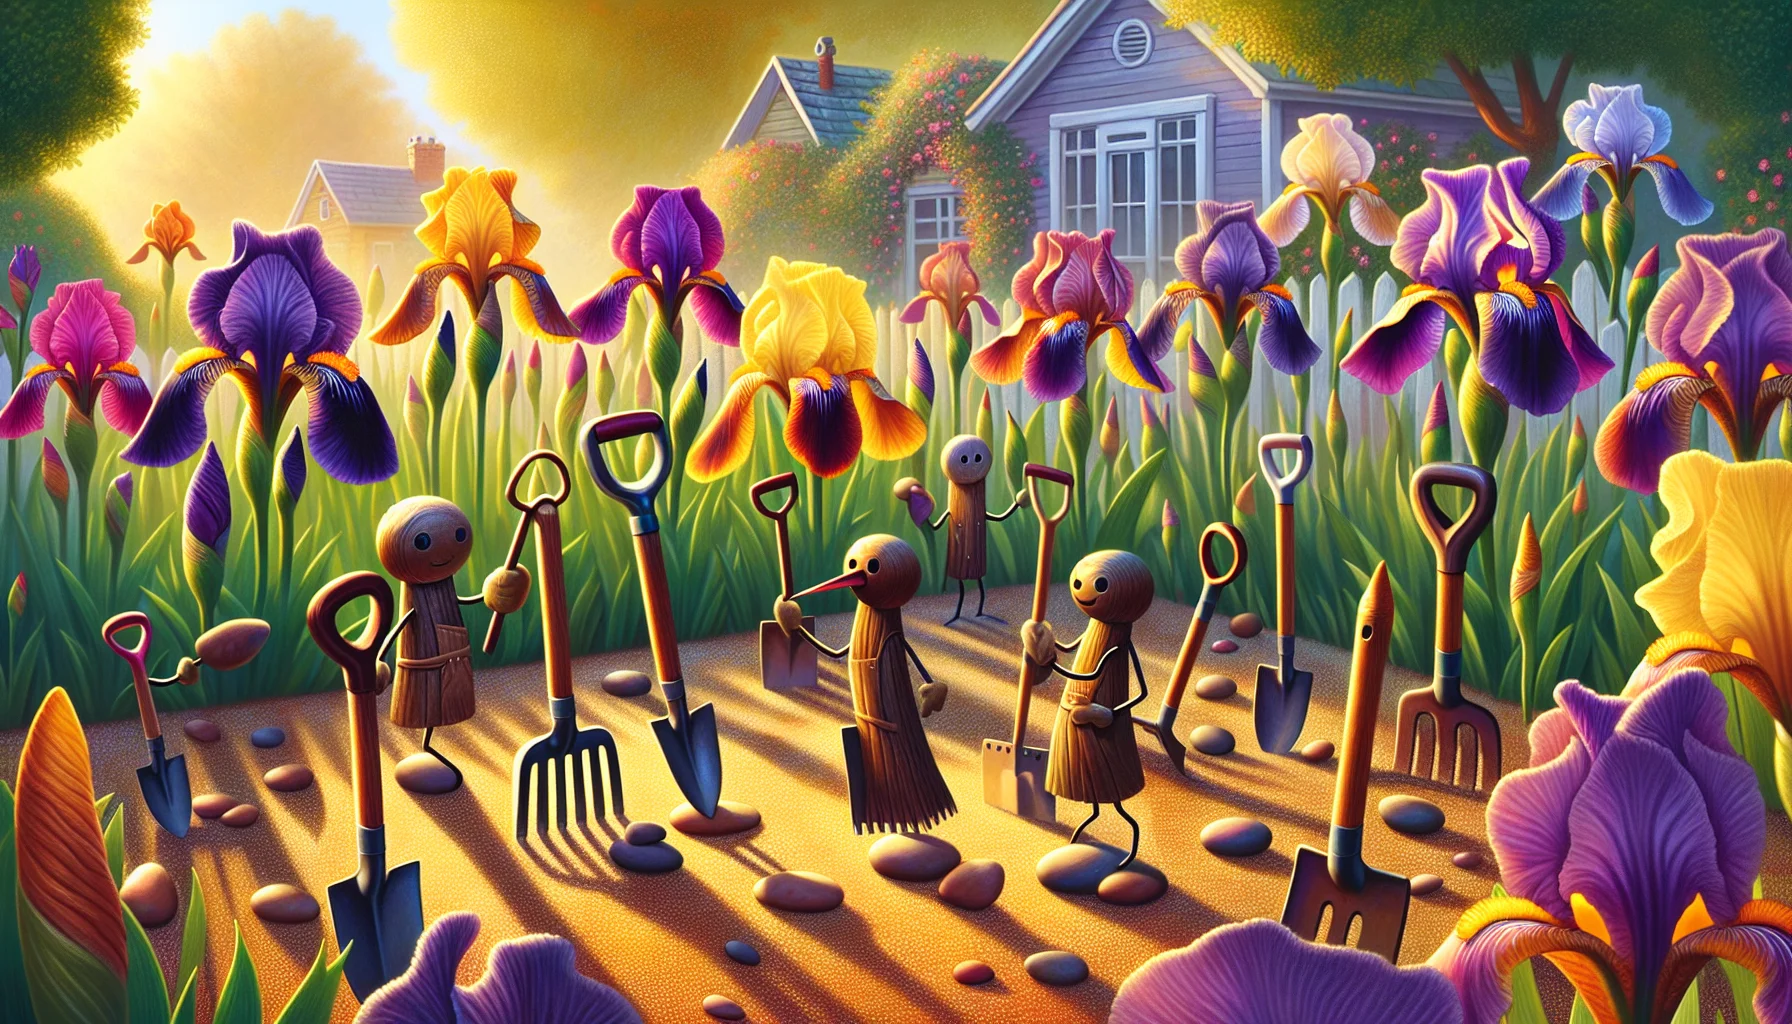 Imagine a whimsical scene of an enchanting suburban garden bursting with radiant Iris flowers. These Irises exhibit hues ranging from deep purple to sunny yellow. Among these vibrantly colored Iris flowers, anthropomorphized garden tools like a lively rake and a jubilant spade are caught in a friendly pebble toss game, their handles bending and twisting like they have a life of their own. The scene is awash with gentle morning sunlight casting long playful shadows, creating a lively and joyful atmosphere that entices onlookers to take part in the fun of gardening.